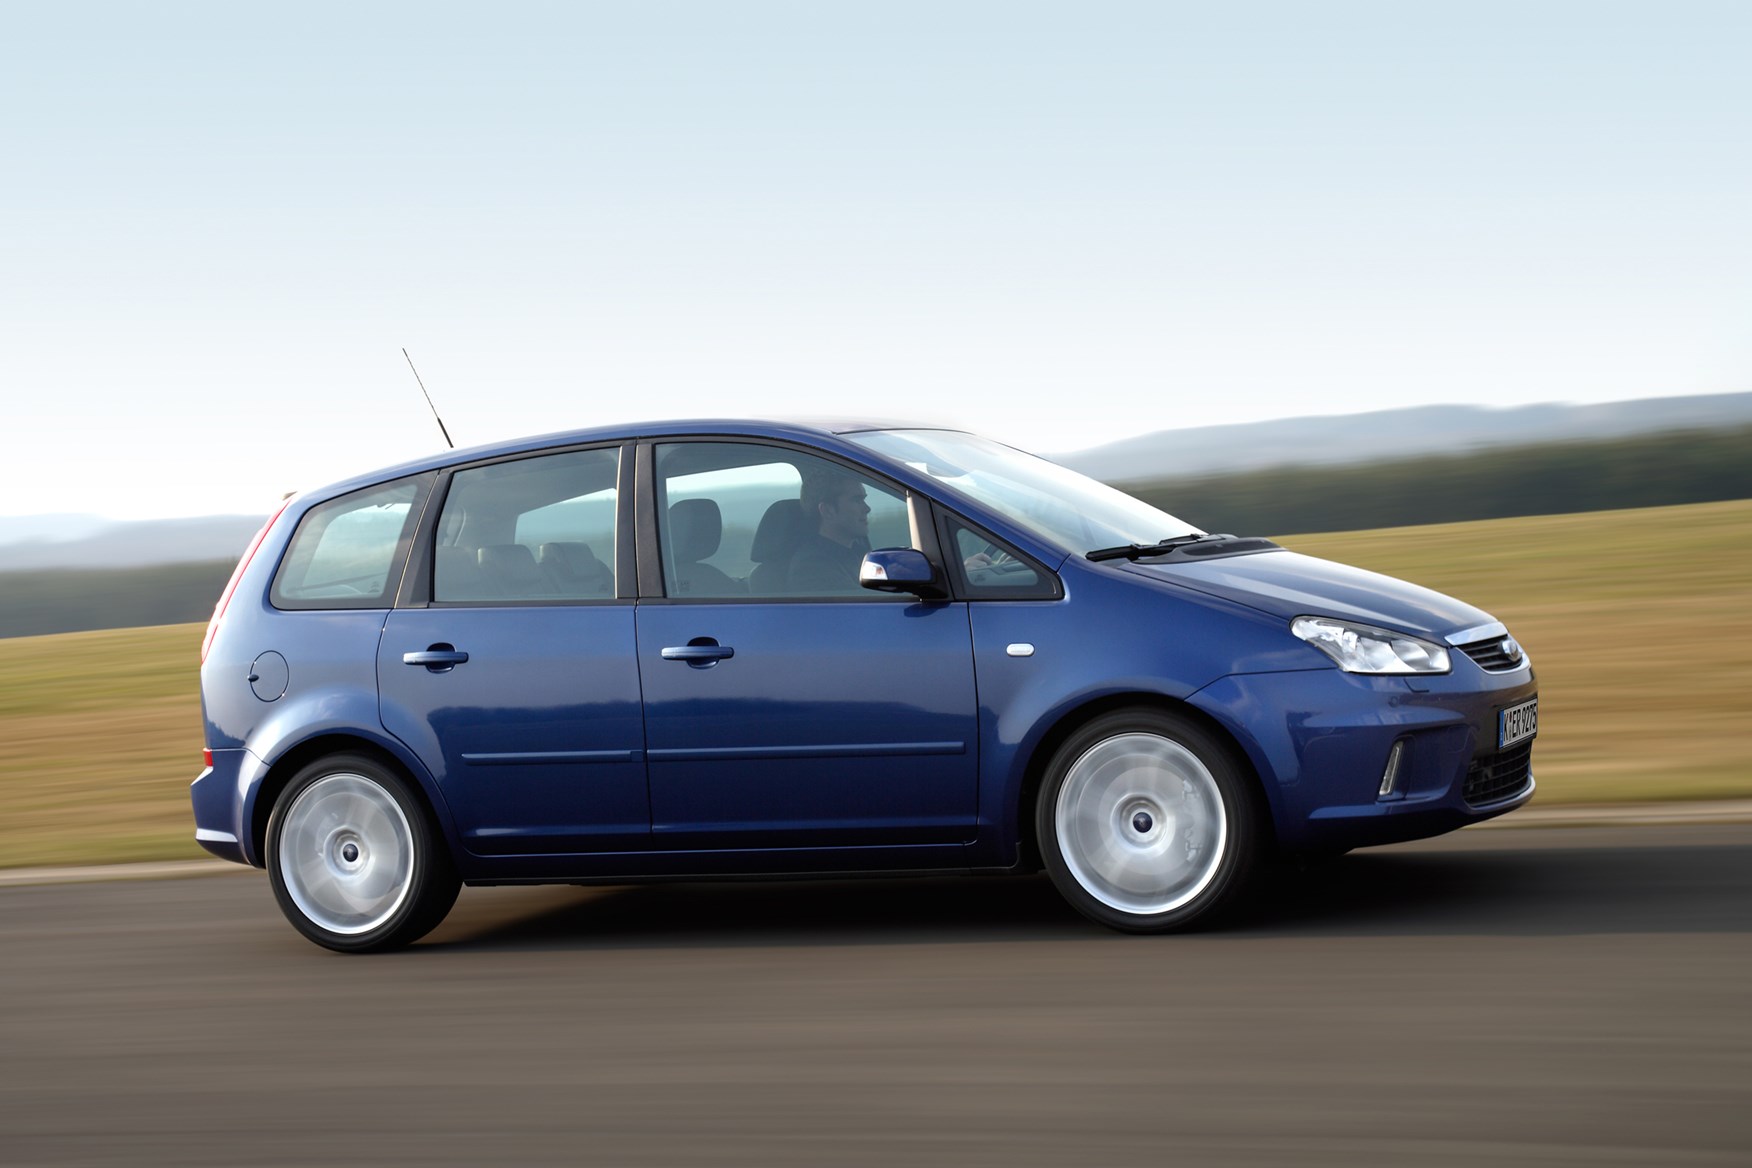 Used Ford Focus C Max Estate 03 10 Review Parkers